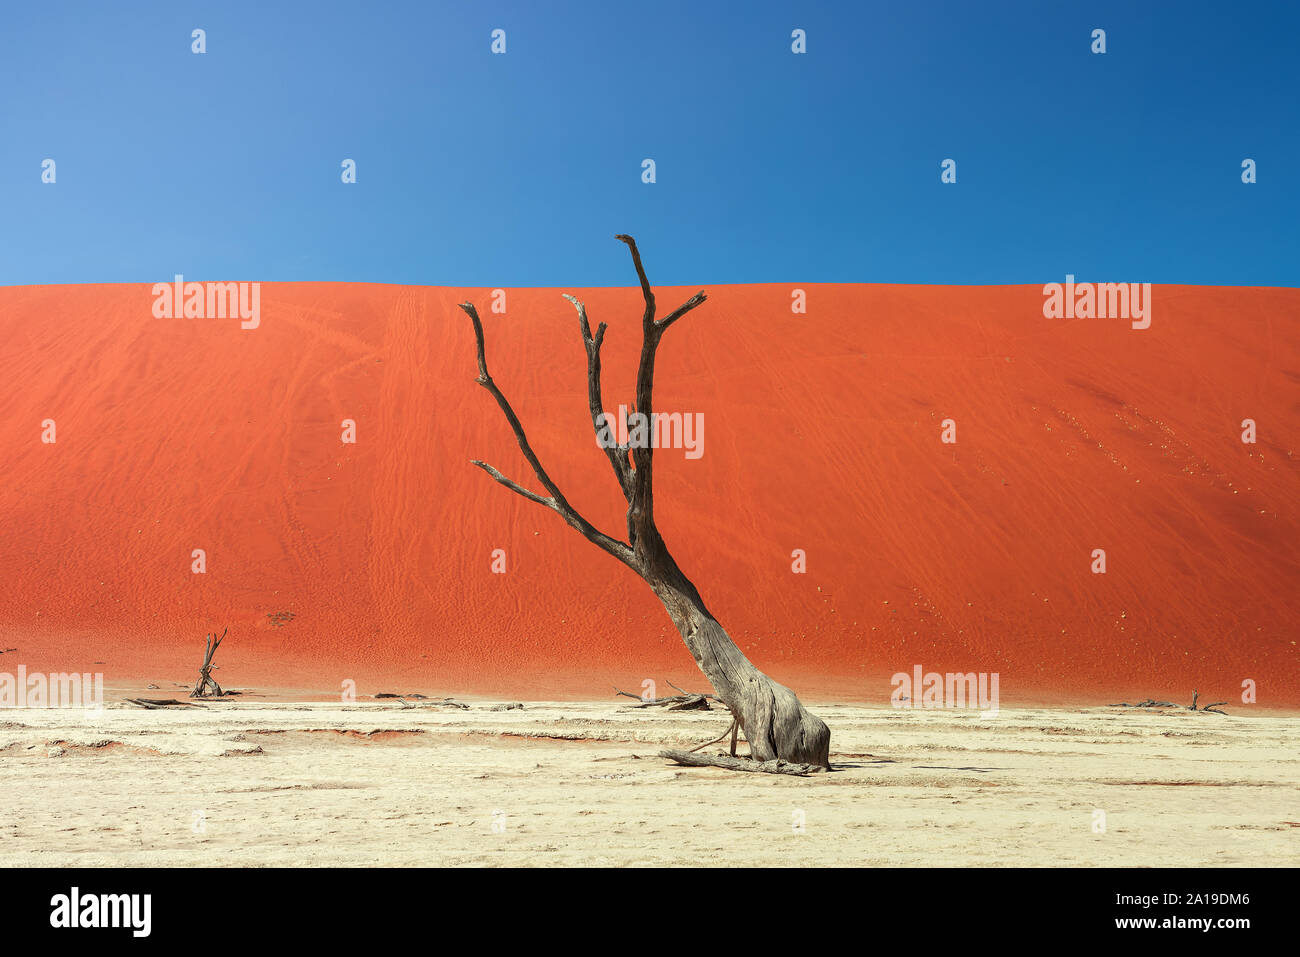 Dead camel thorn tree and the red dunes of Deadvlei in Namibia Stock Photo